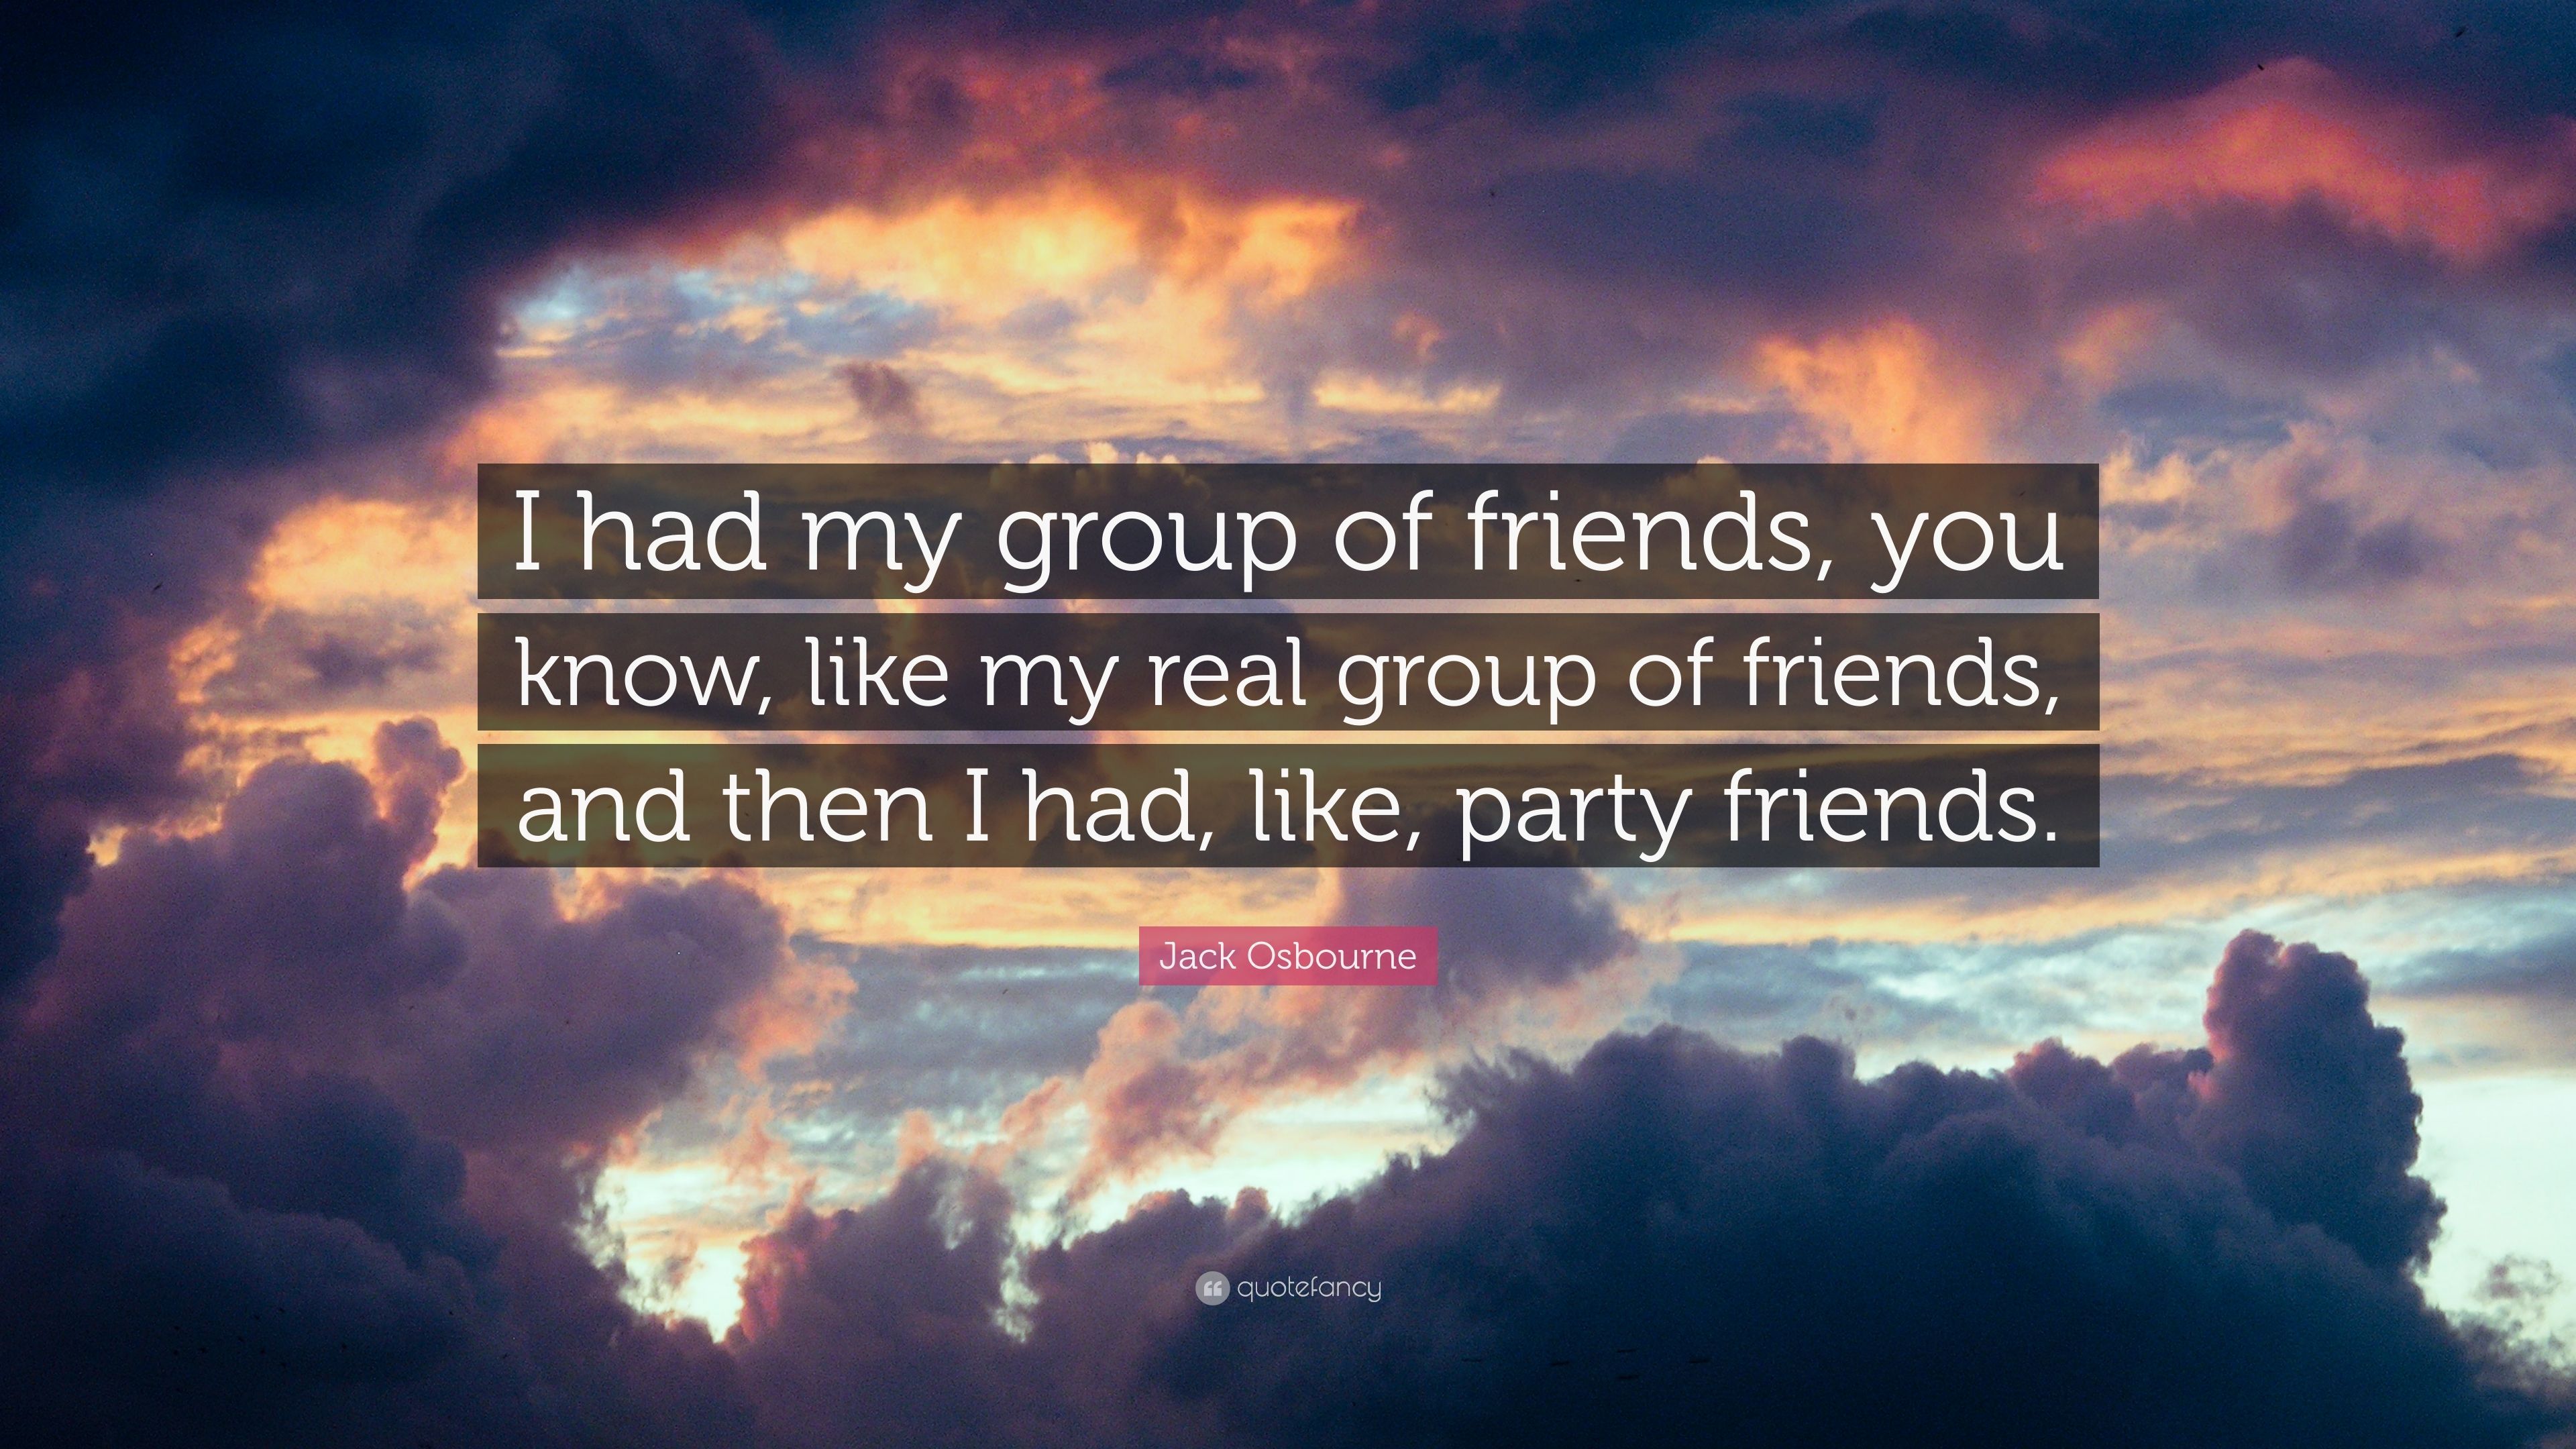 Jack Osbourne Quote: “I had my group of friends, you know, like my